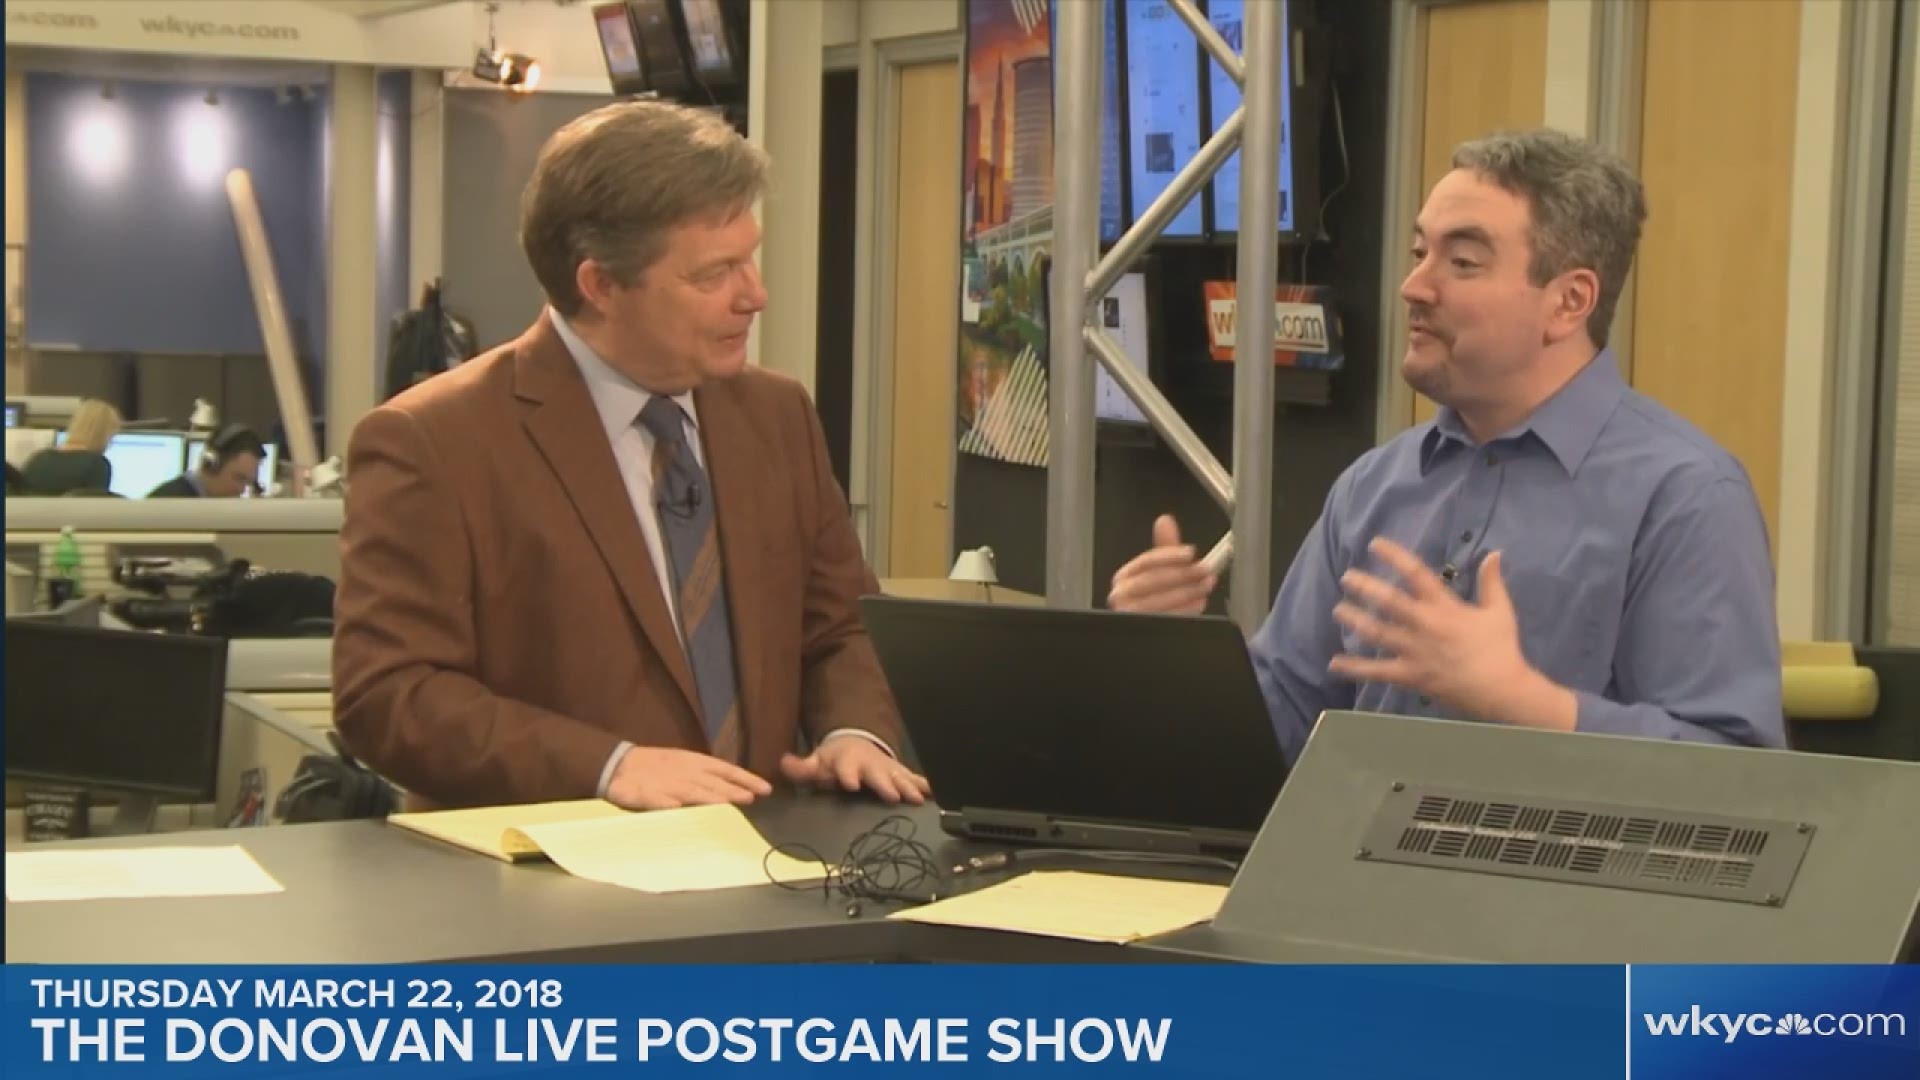 Your response to Sam Darnold being Jimmy's pick for Cleveland Browns: Donovan Live Postgame Show